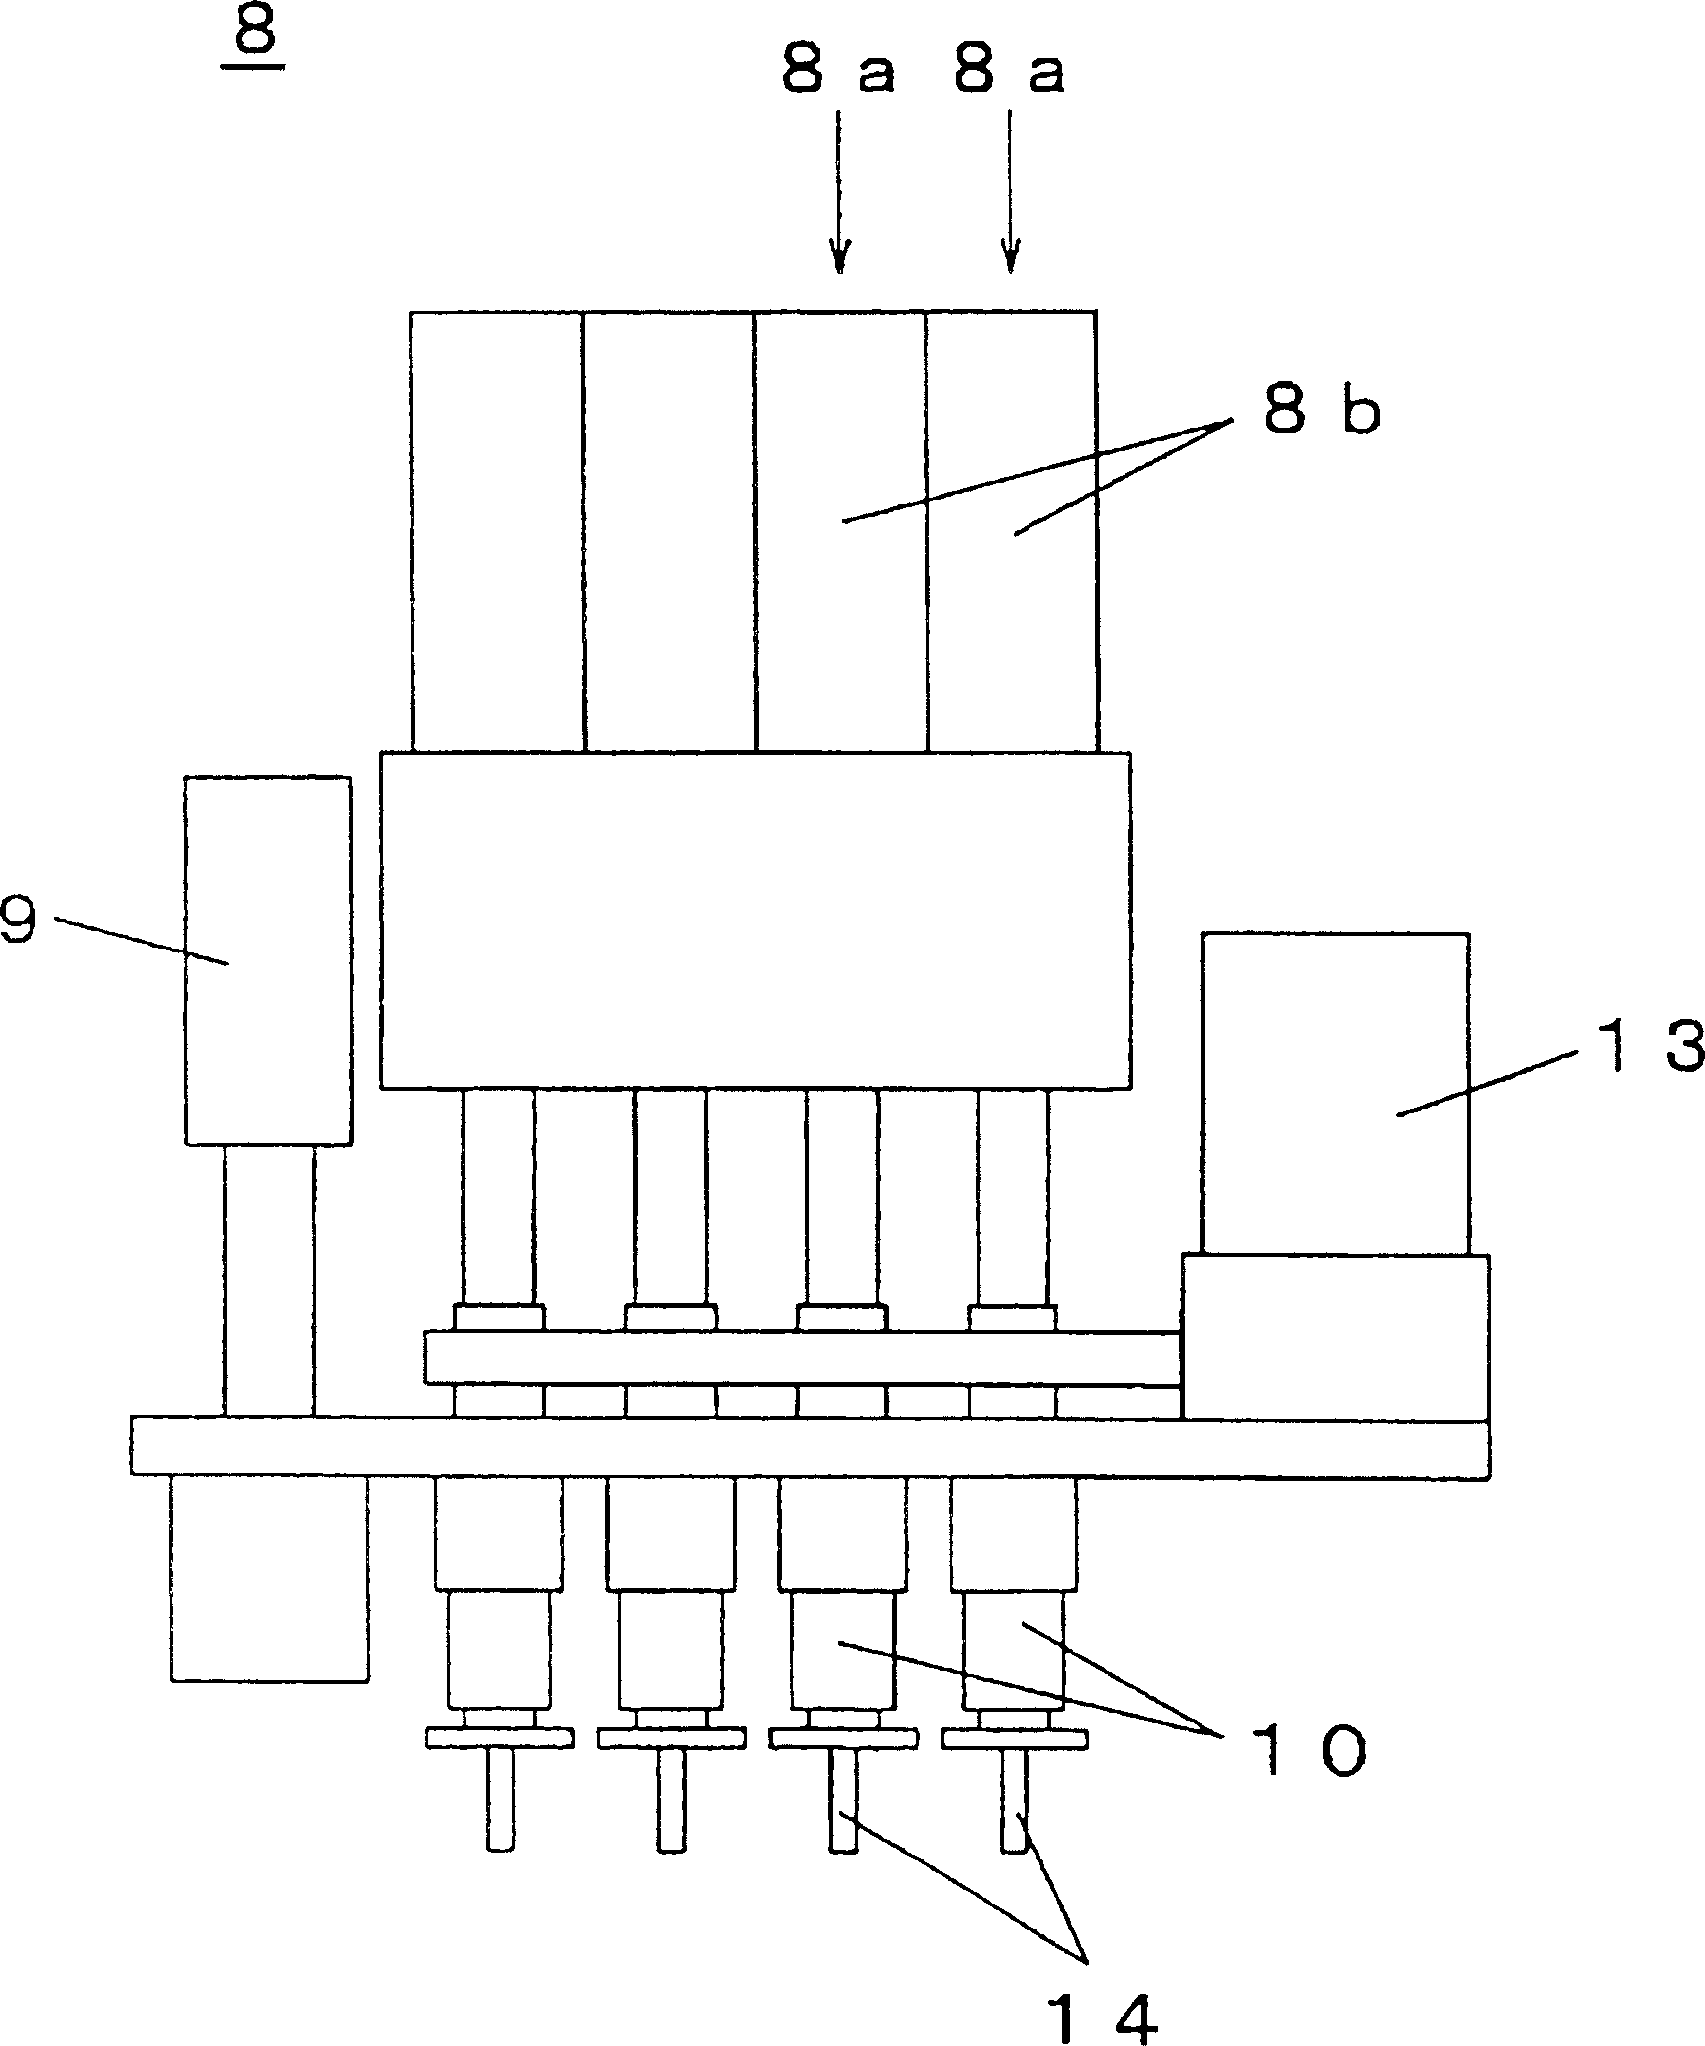 Electronic parts mounting apparatus and method